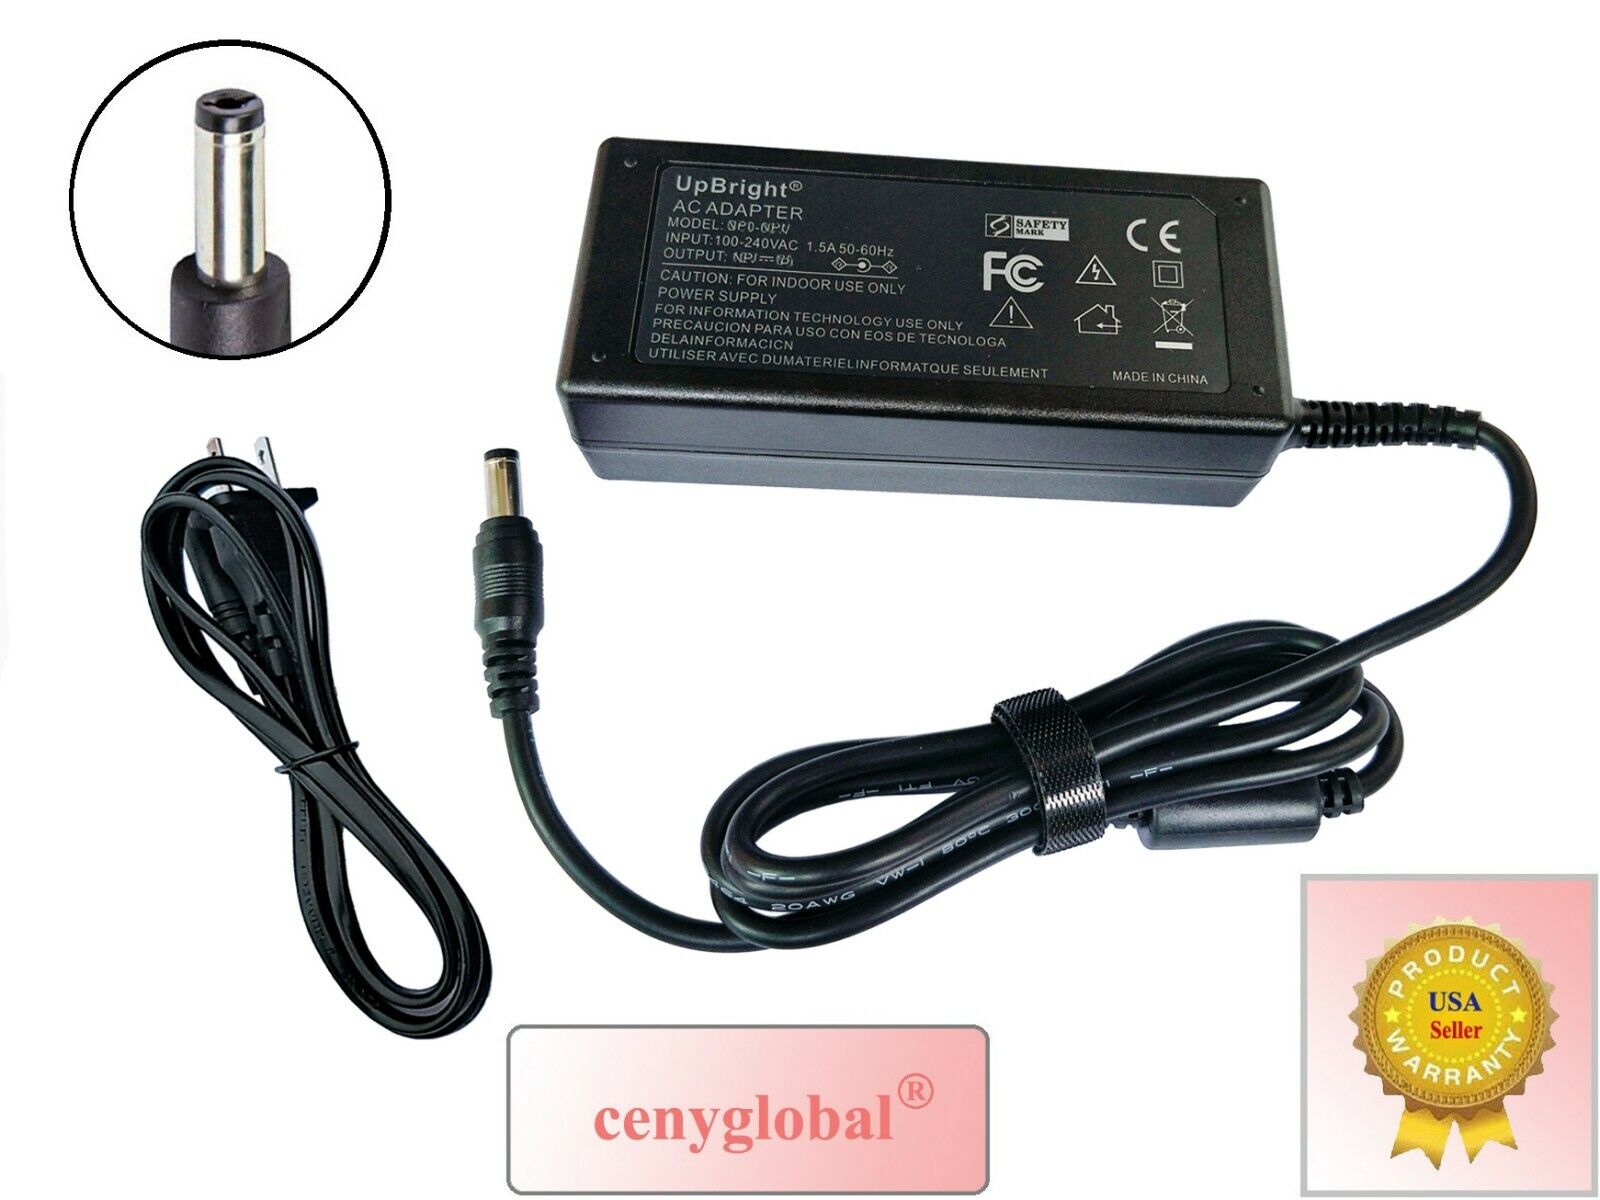 Global AC / DC Adapter For Model: BYX-2402500 24VDC Switching Power Supply Cord